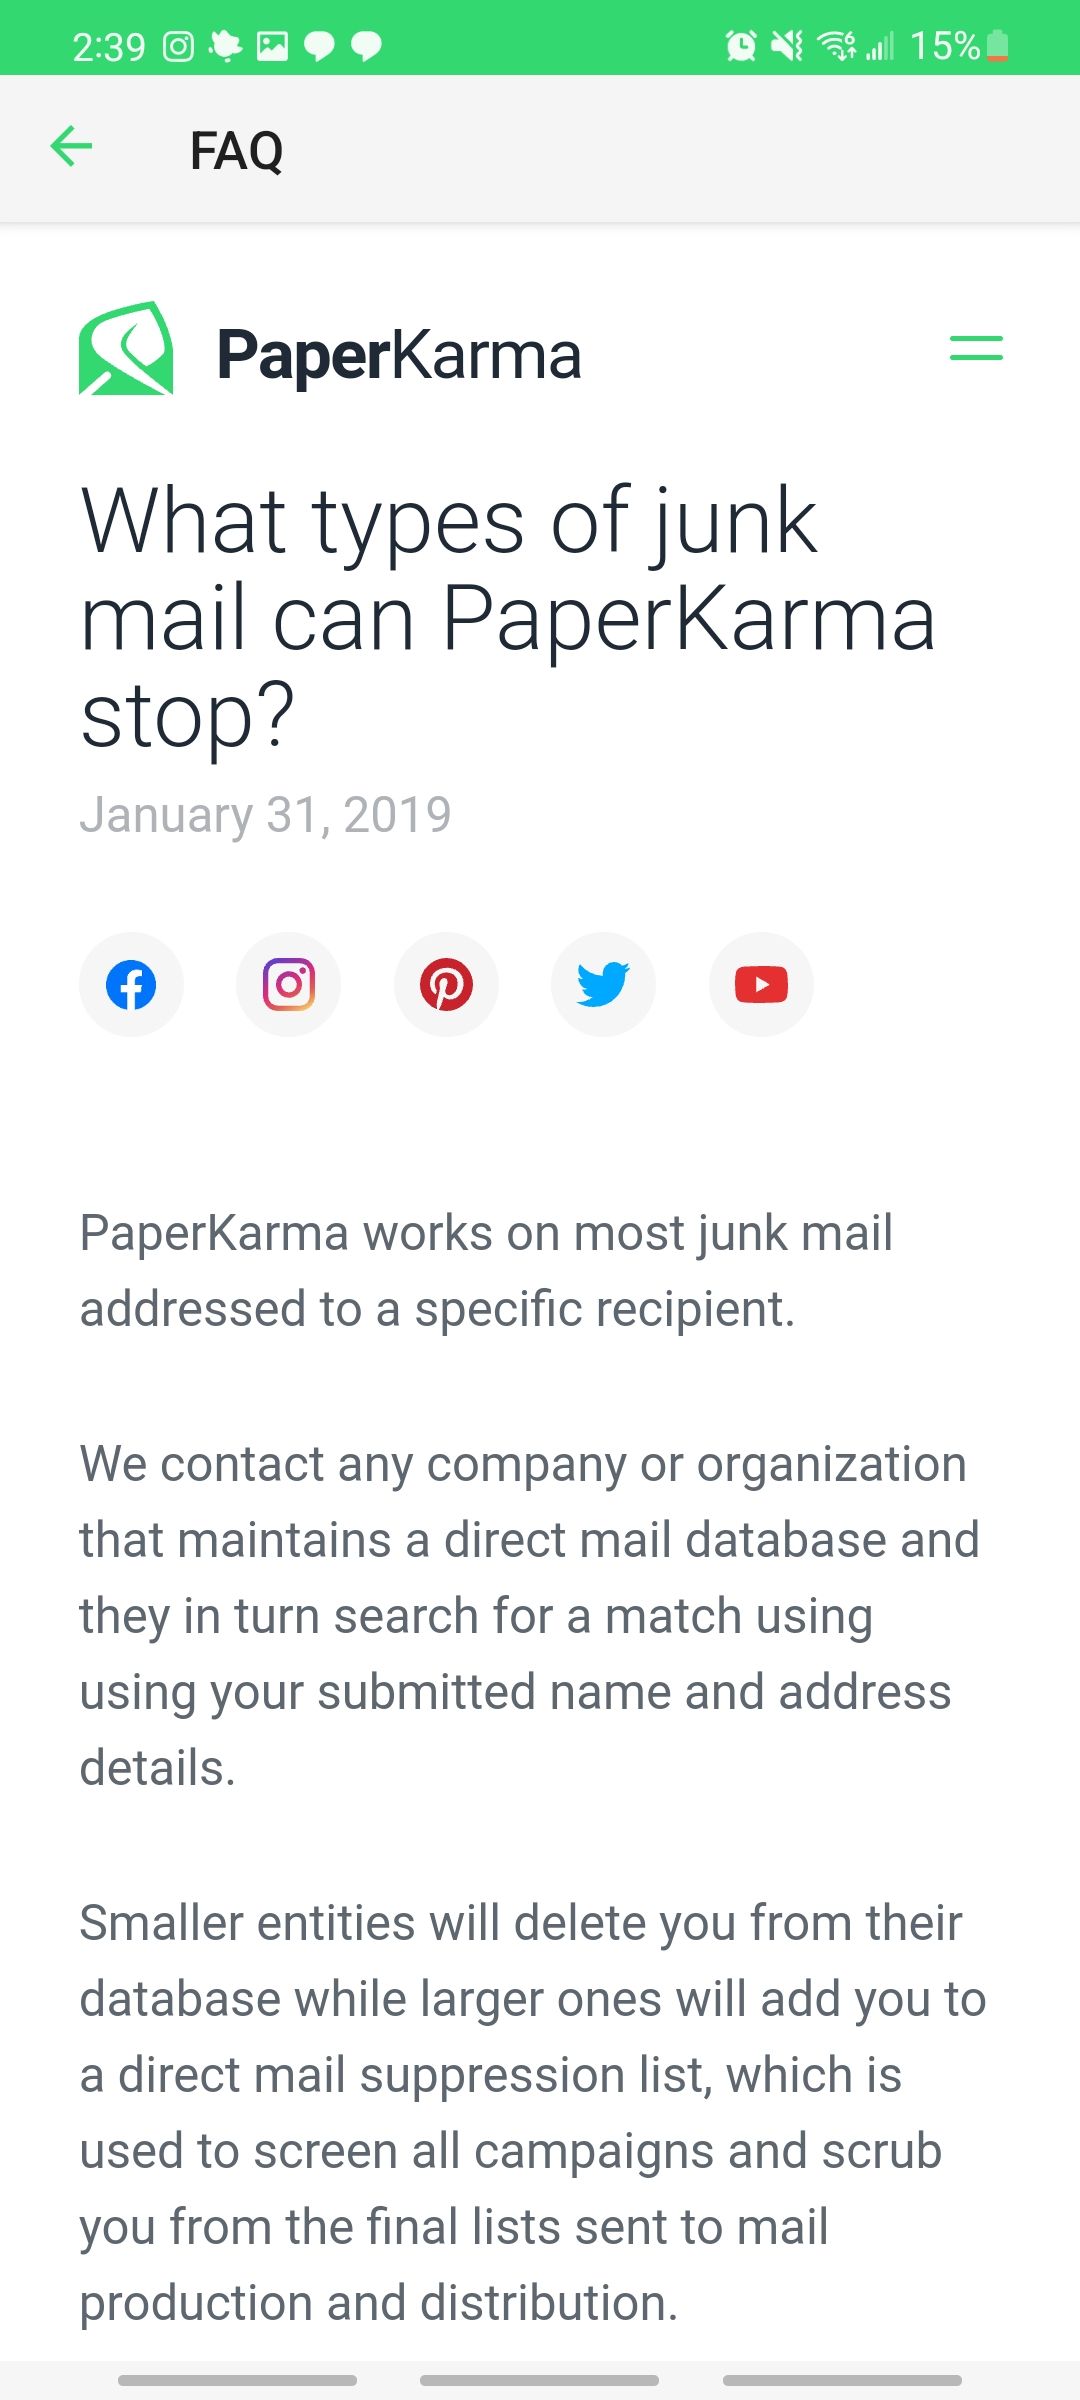 paperkarma app answering question of what types of junk mail the app can stop